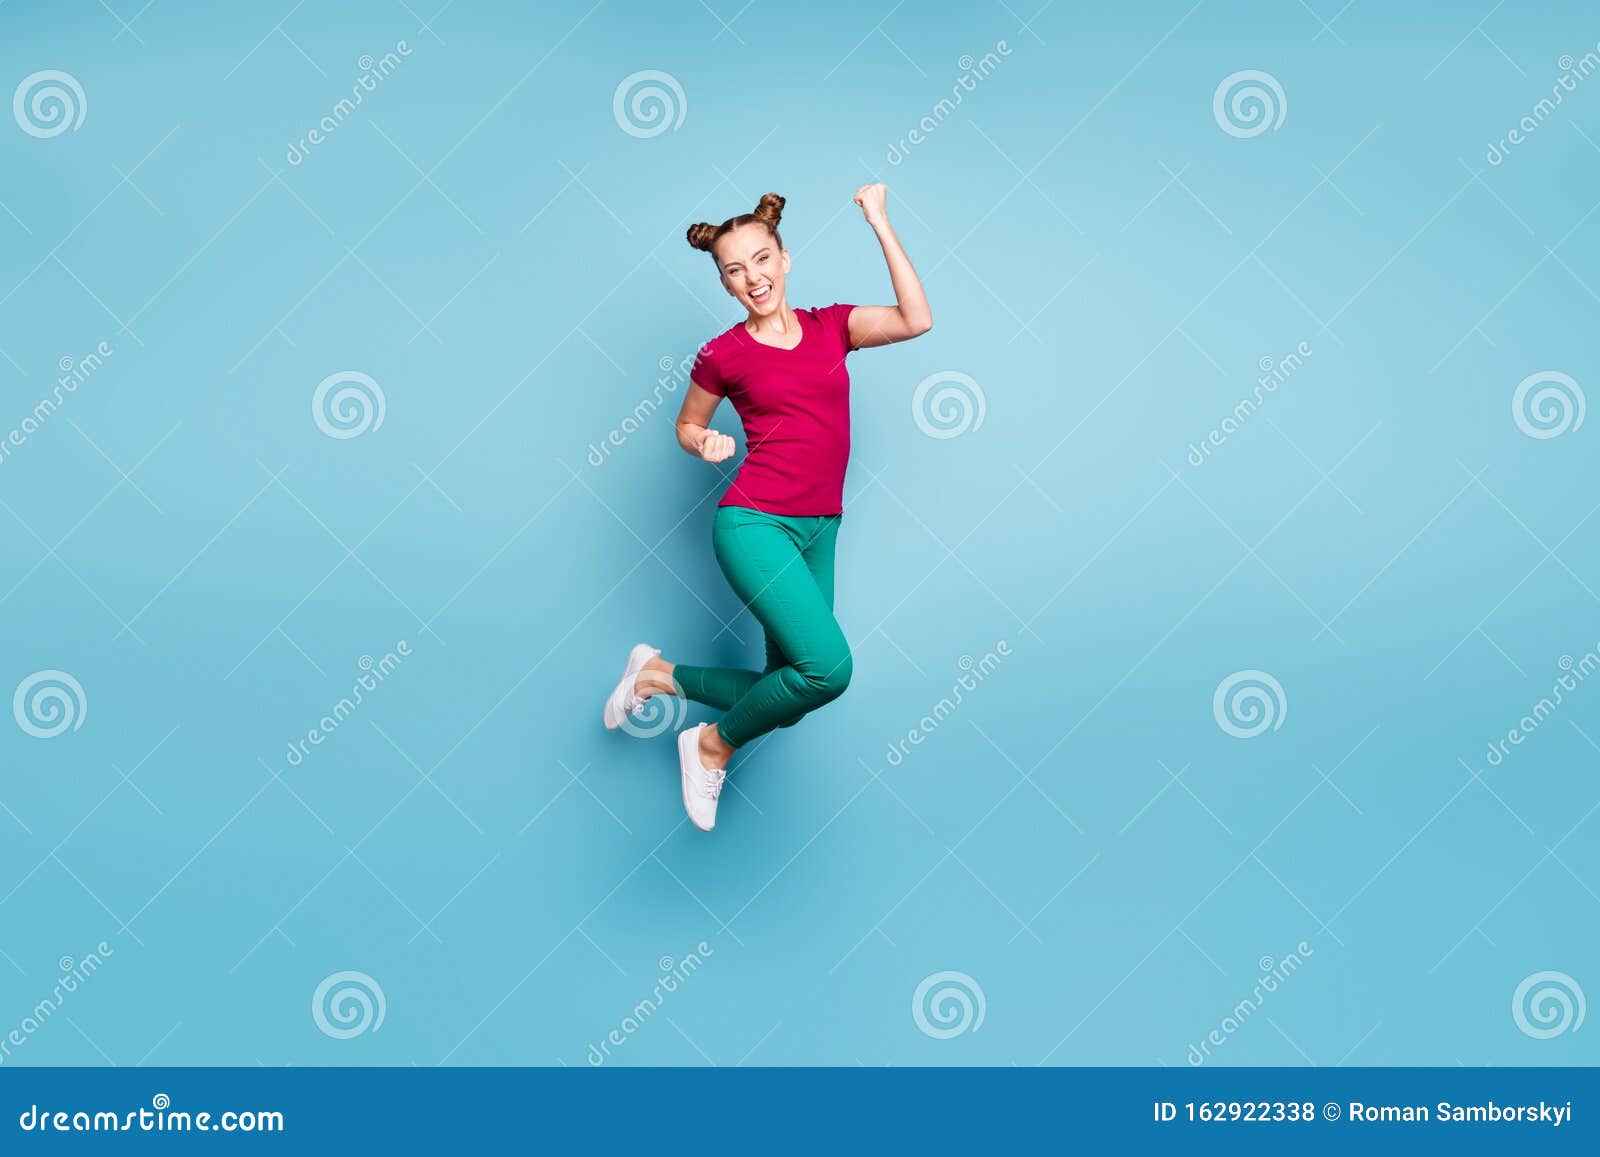 Full Length Body Size Turned Photo of Excited Ecstatic Rejoicing Girl ...